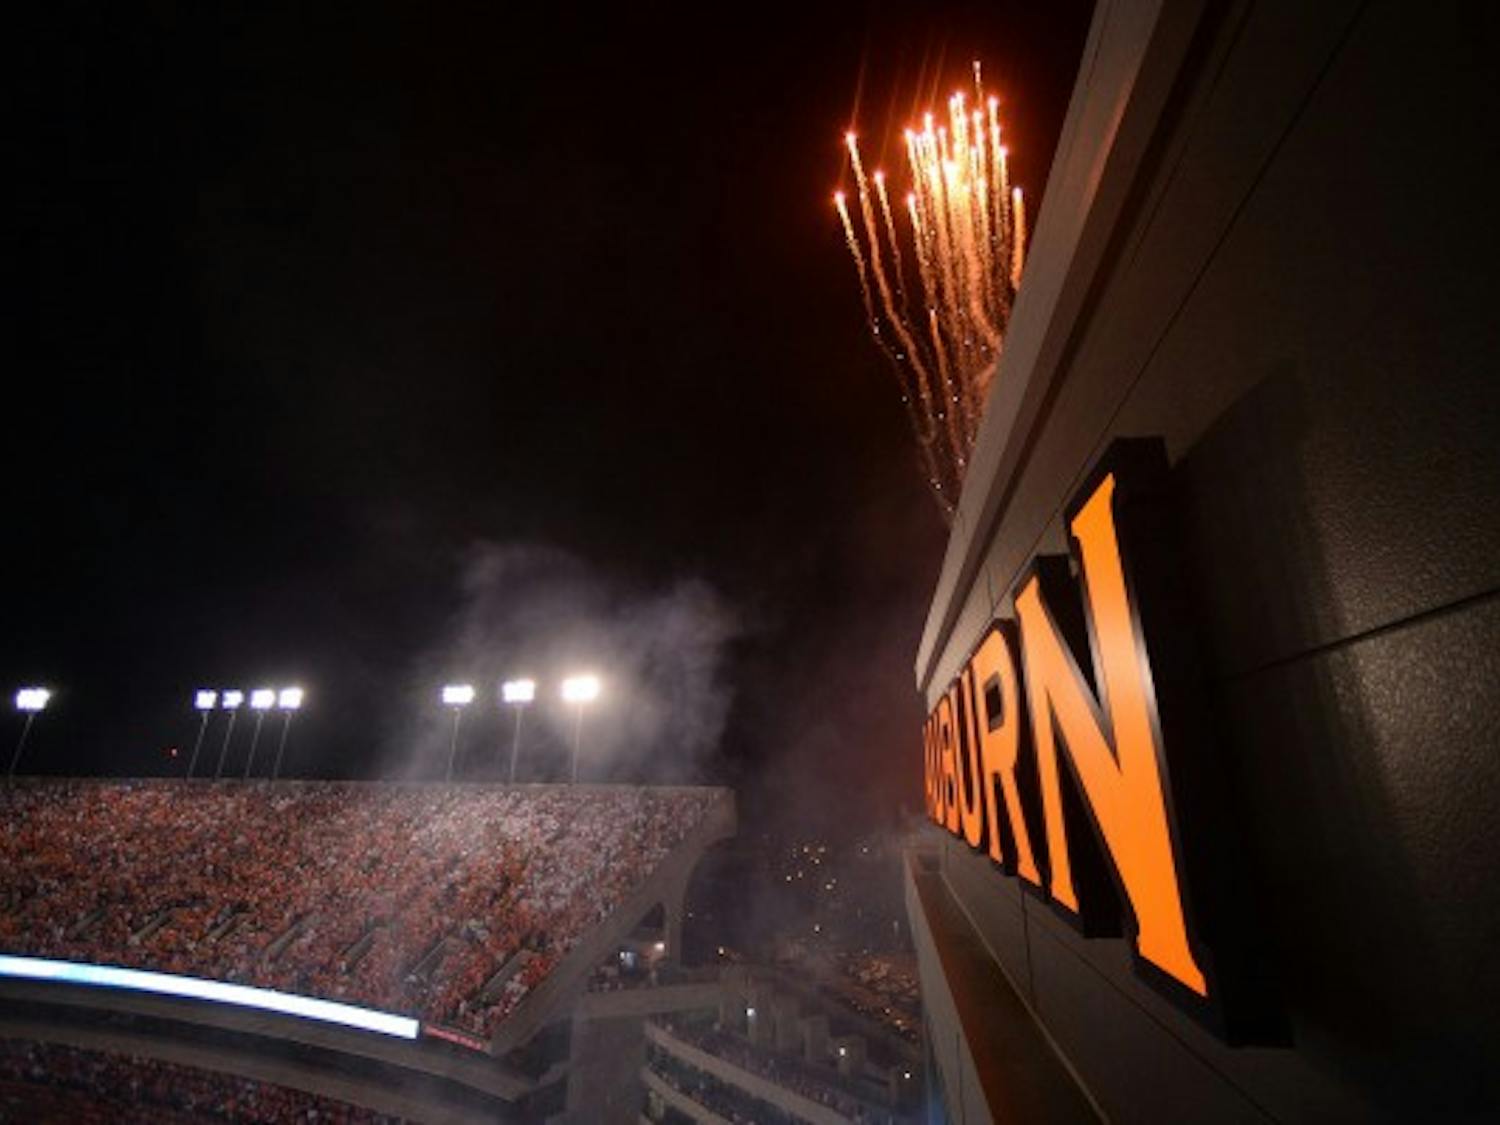 Fireworks over the video board